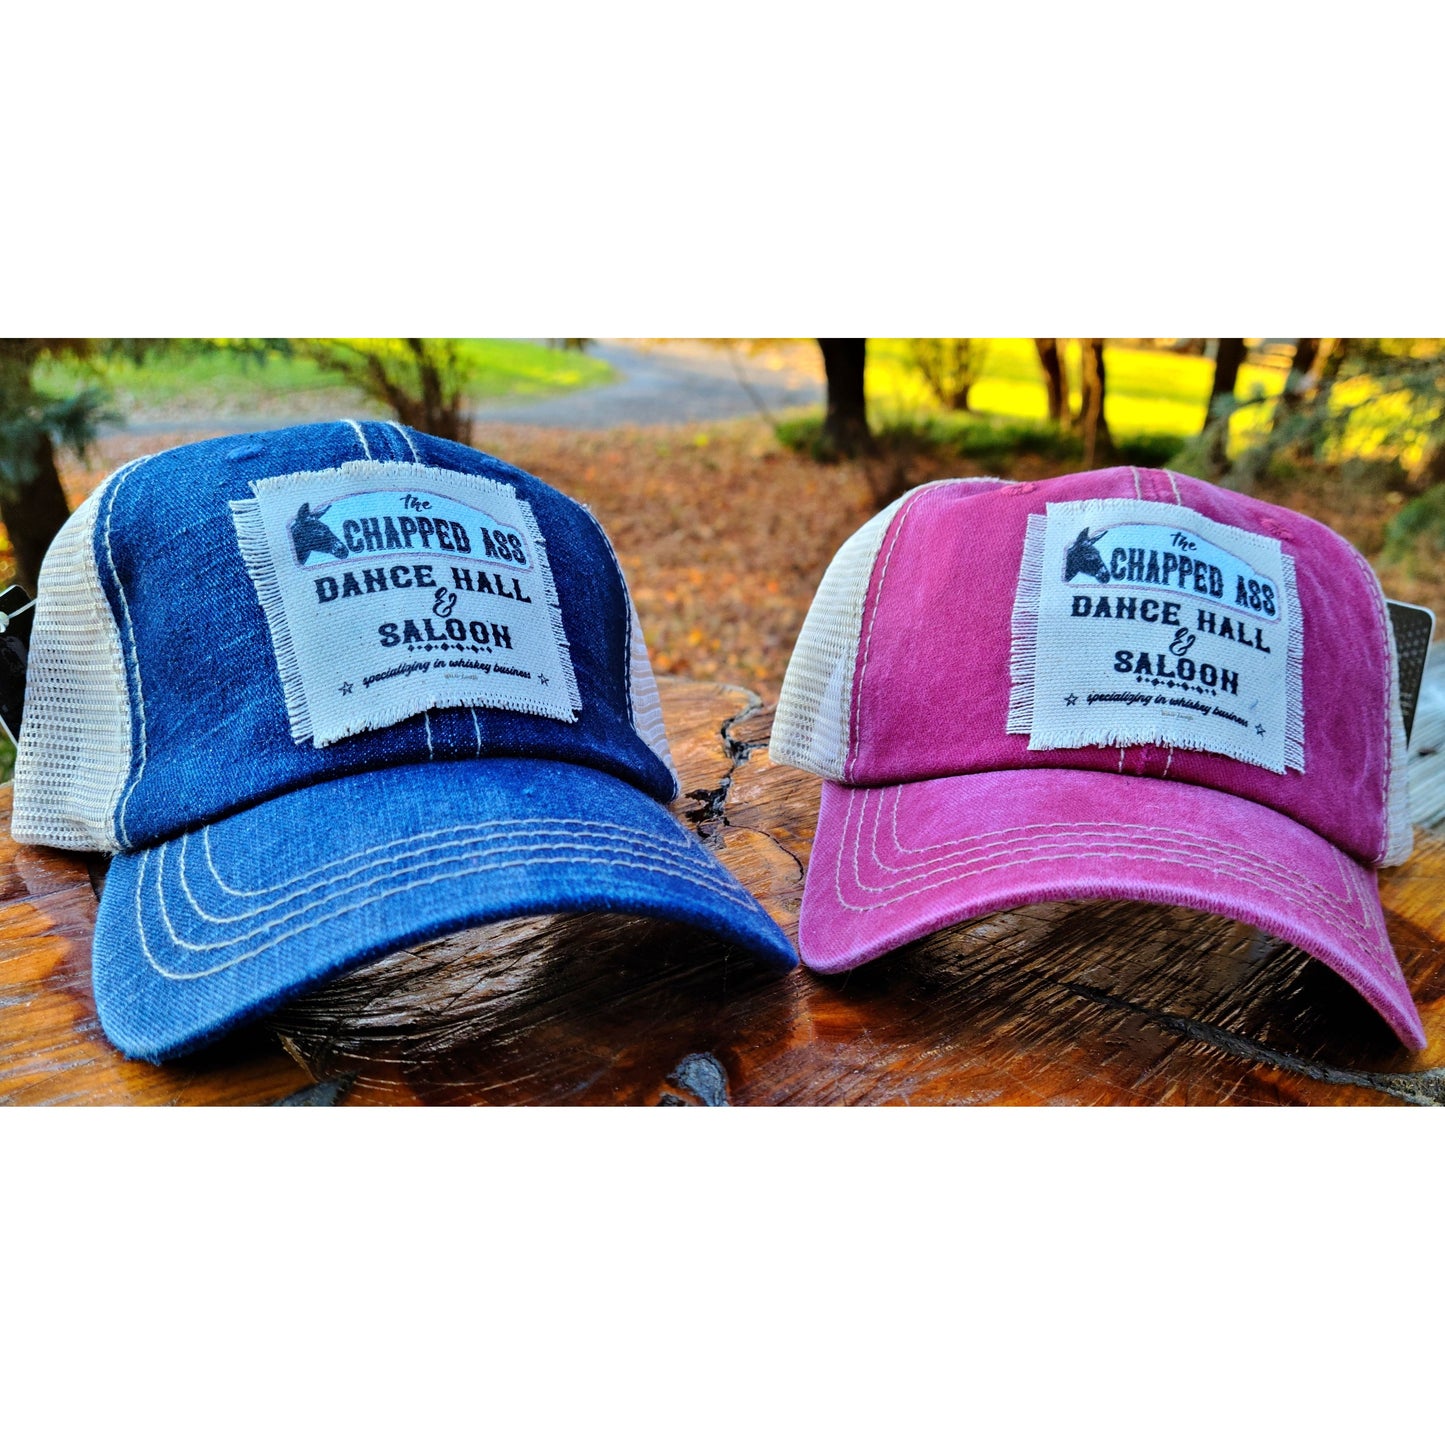 Red and blue Trucker hats featuring the chapped ass dance hall and saloon with a donkey on it